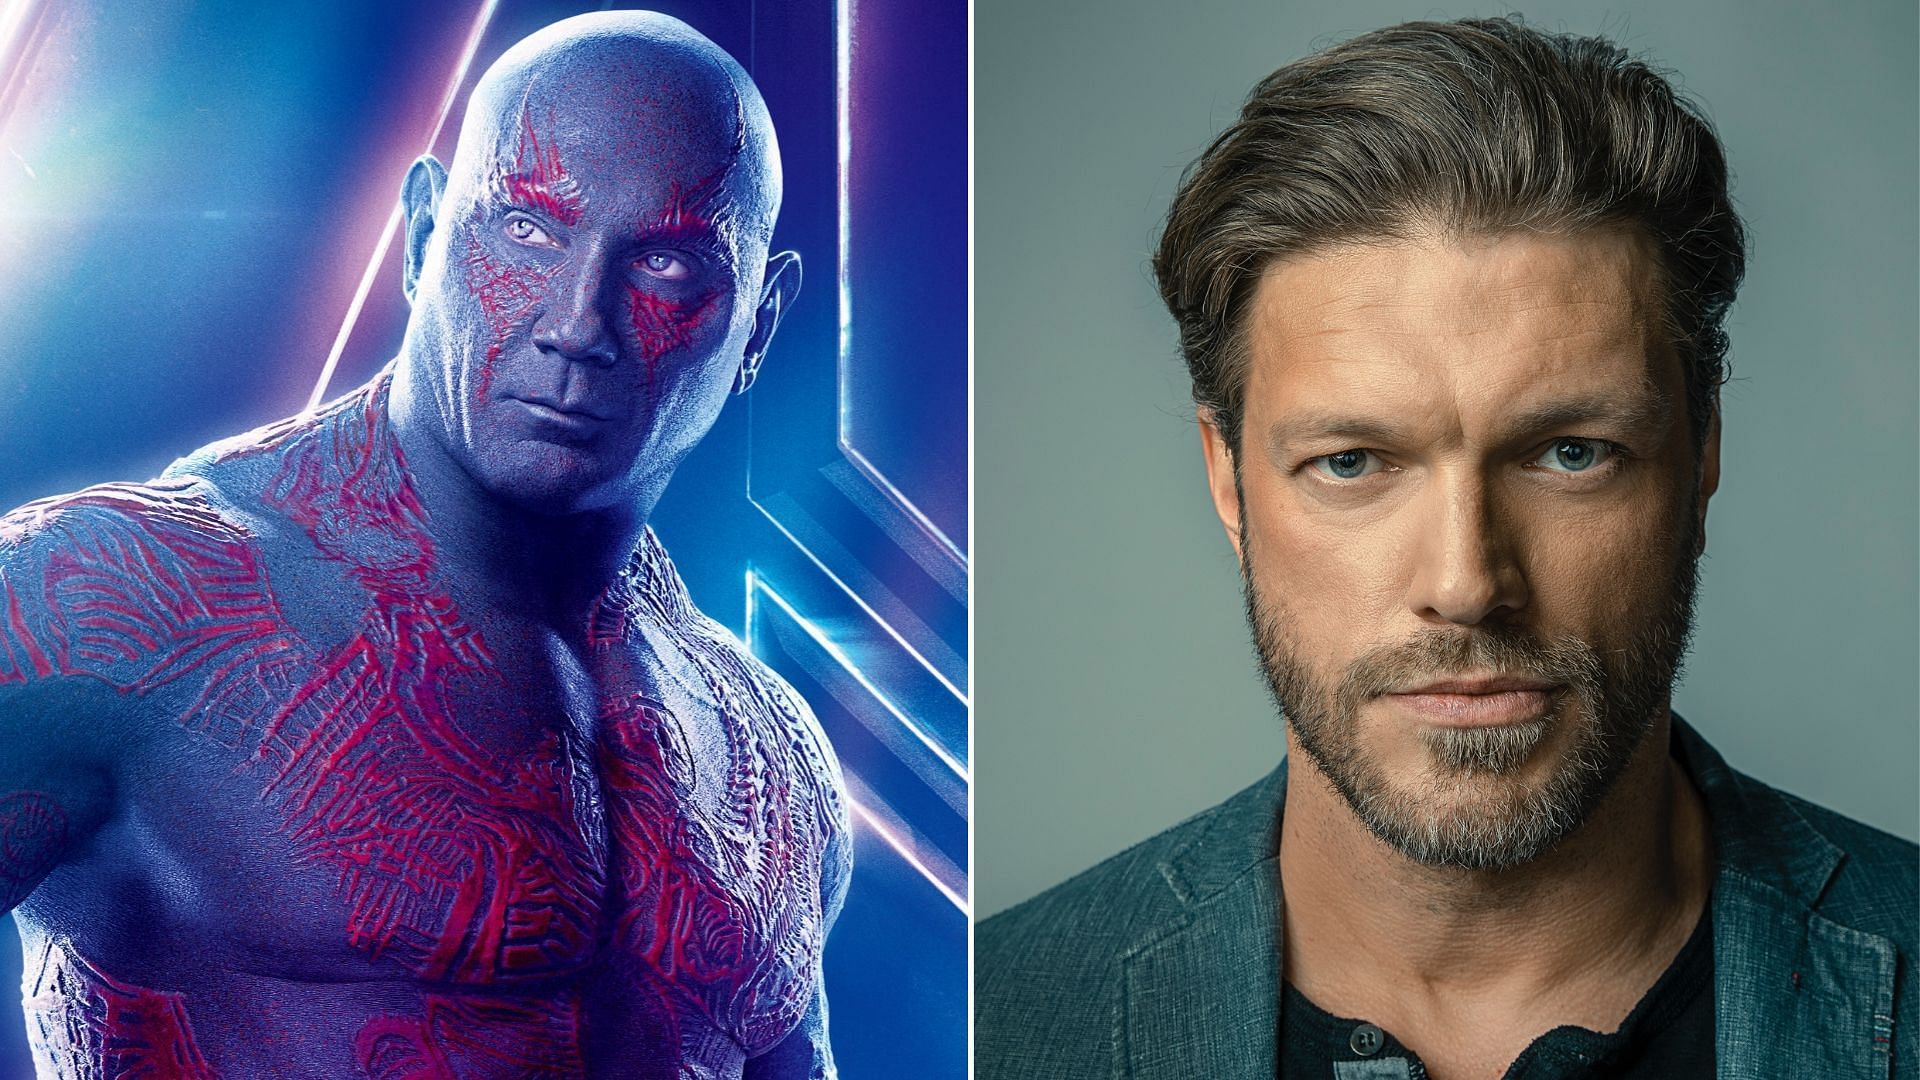 Batista played Drax in Guardians of the Galaxy